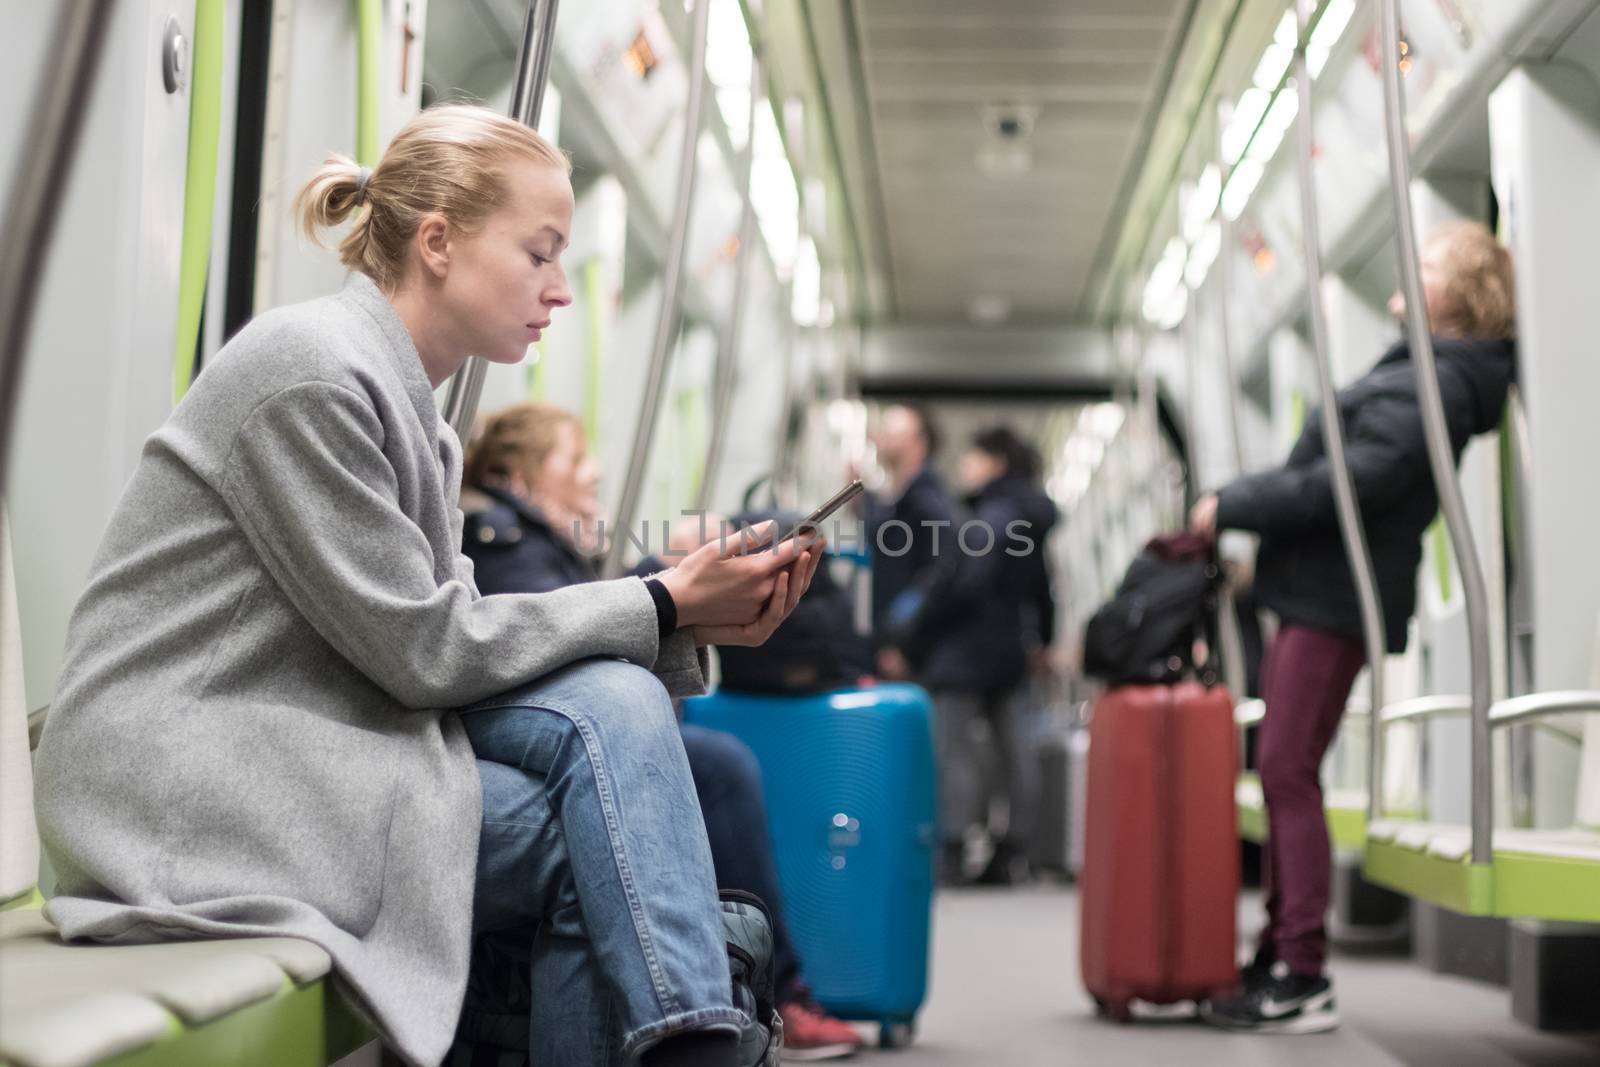 Beautiful blonde caucasian woman wearing winter coat reading on the phone while traveling by metro. Public transportation concept.